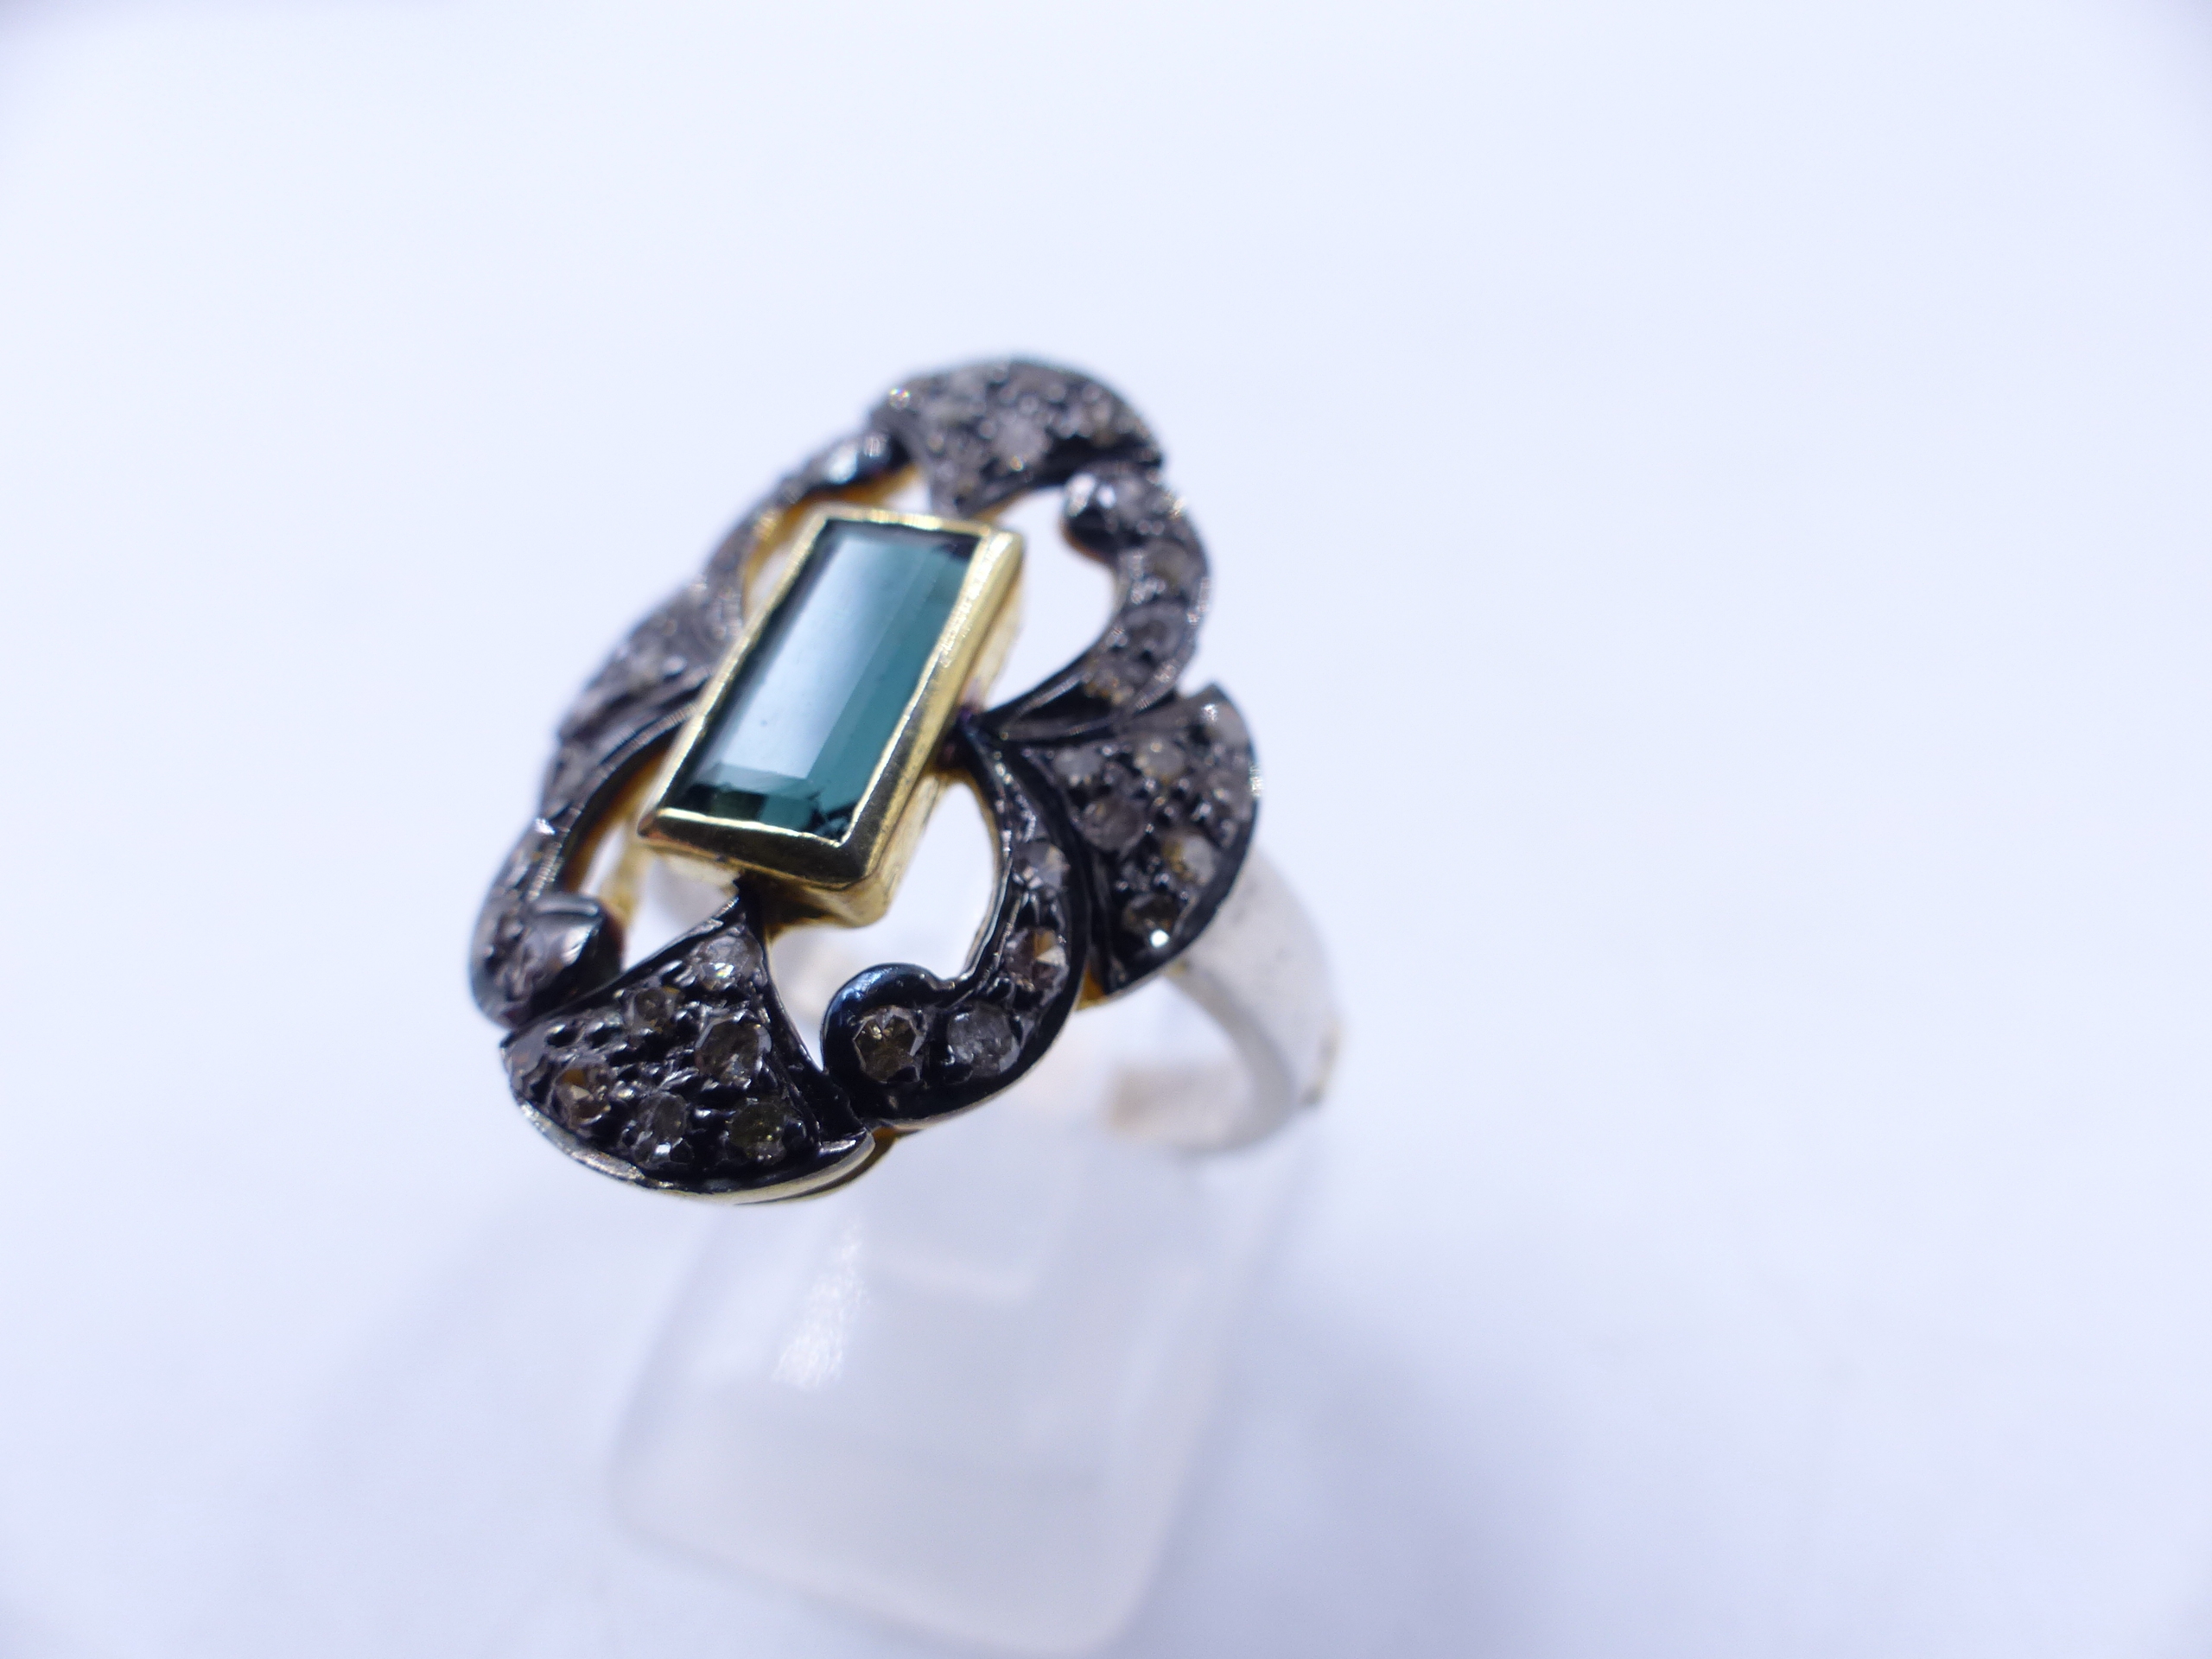 A GREEN TOURMALINE AND FILIGREE SET DIAMOND RING. THE CENTRAL GREEN TOURMALINE IS AN ELONGATED - Image 3 of 19